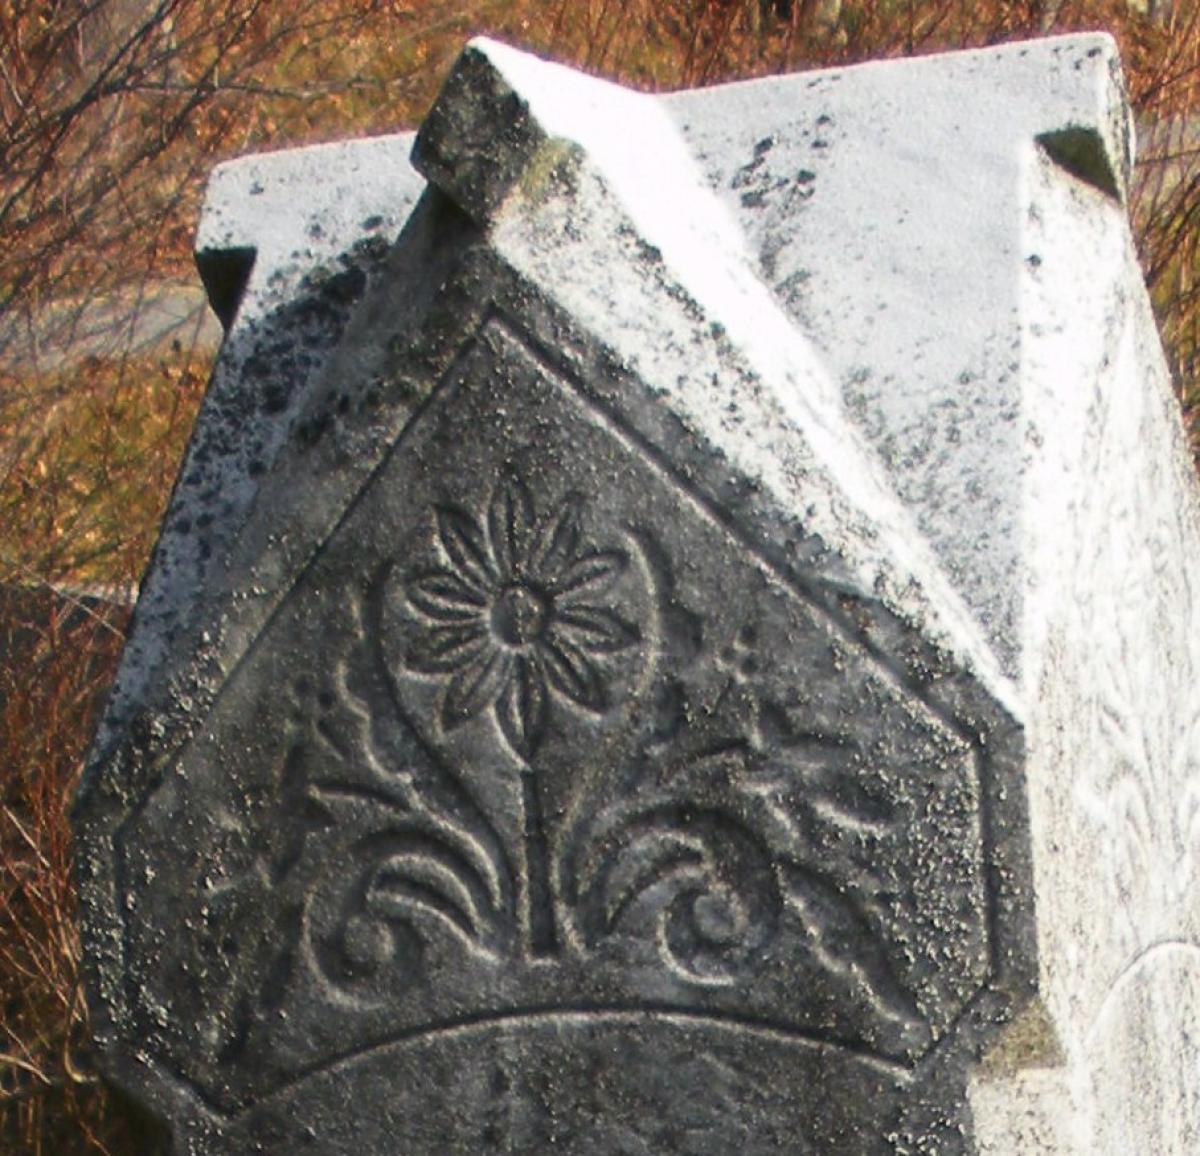 OK, Grove, Headstone Symbols and Meanings, Flower, Daisy 